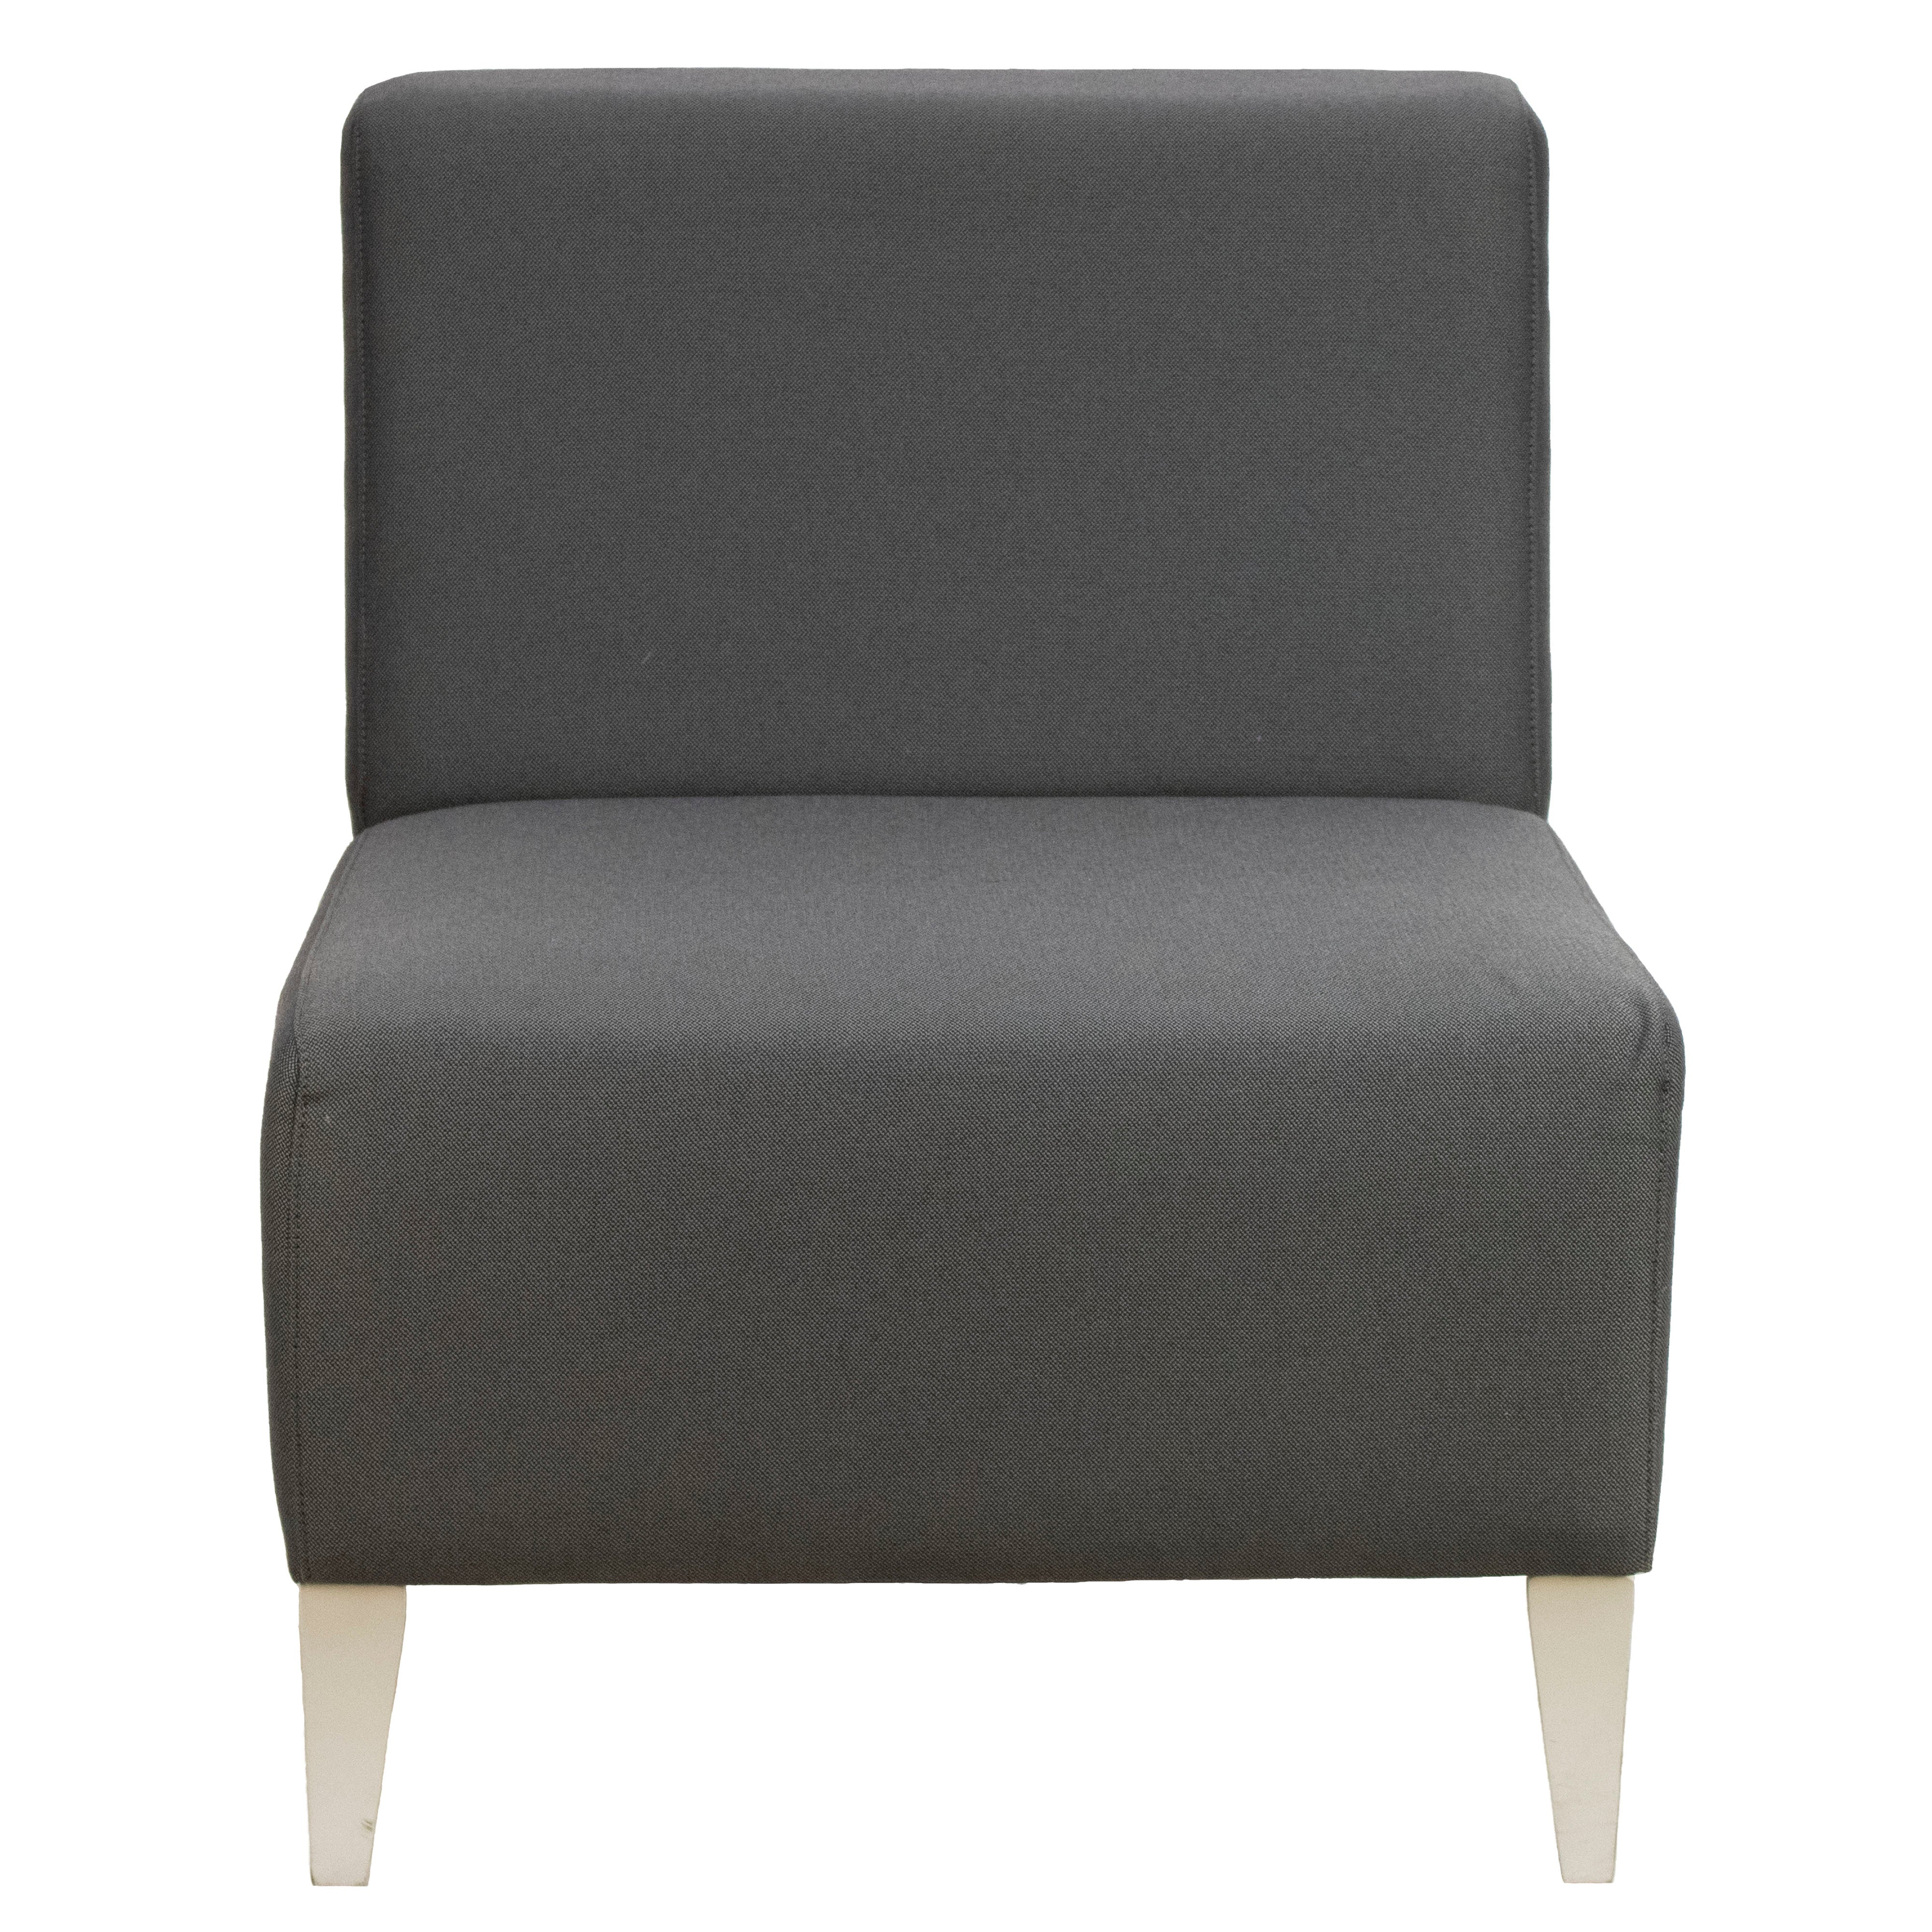 Coalesse Bix Lounge Chair, Grey - Preowned